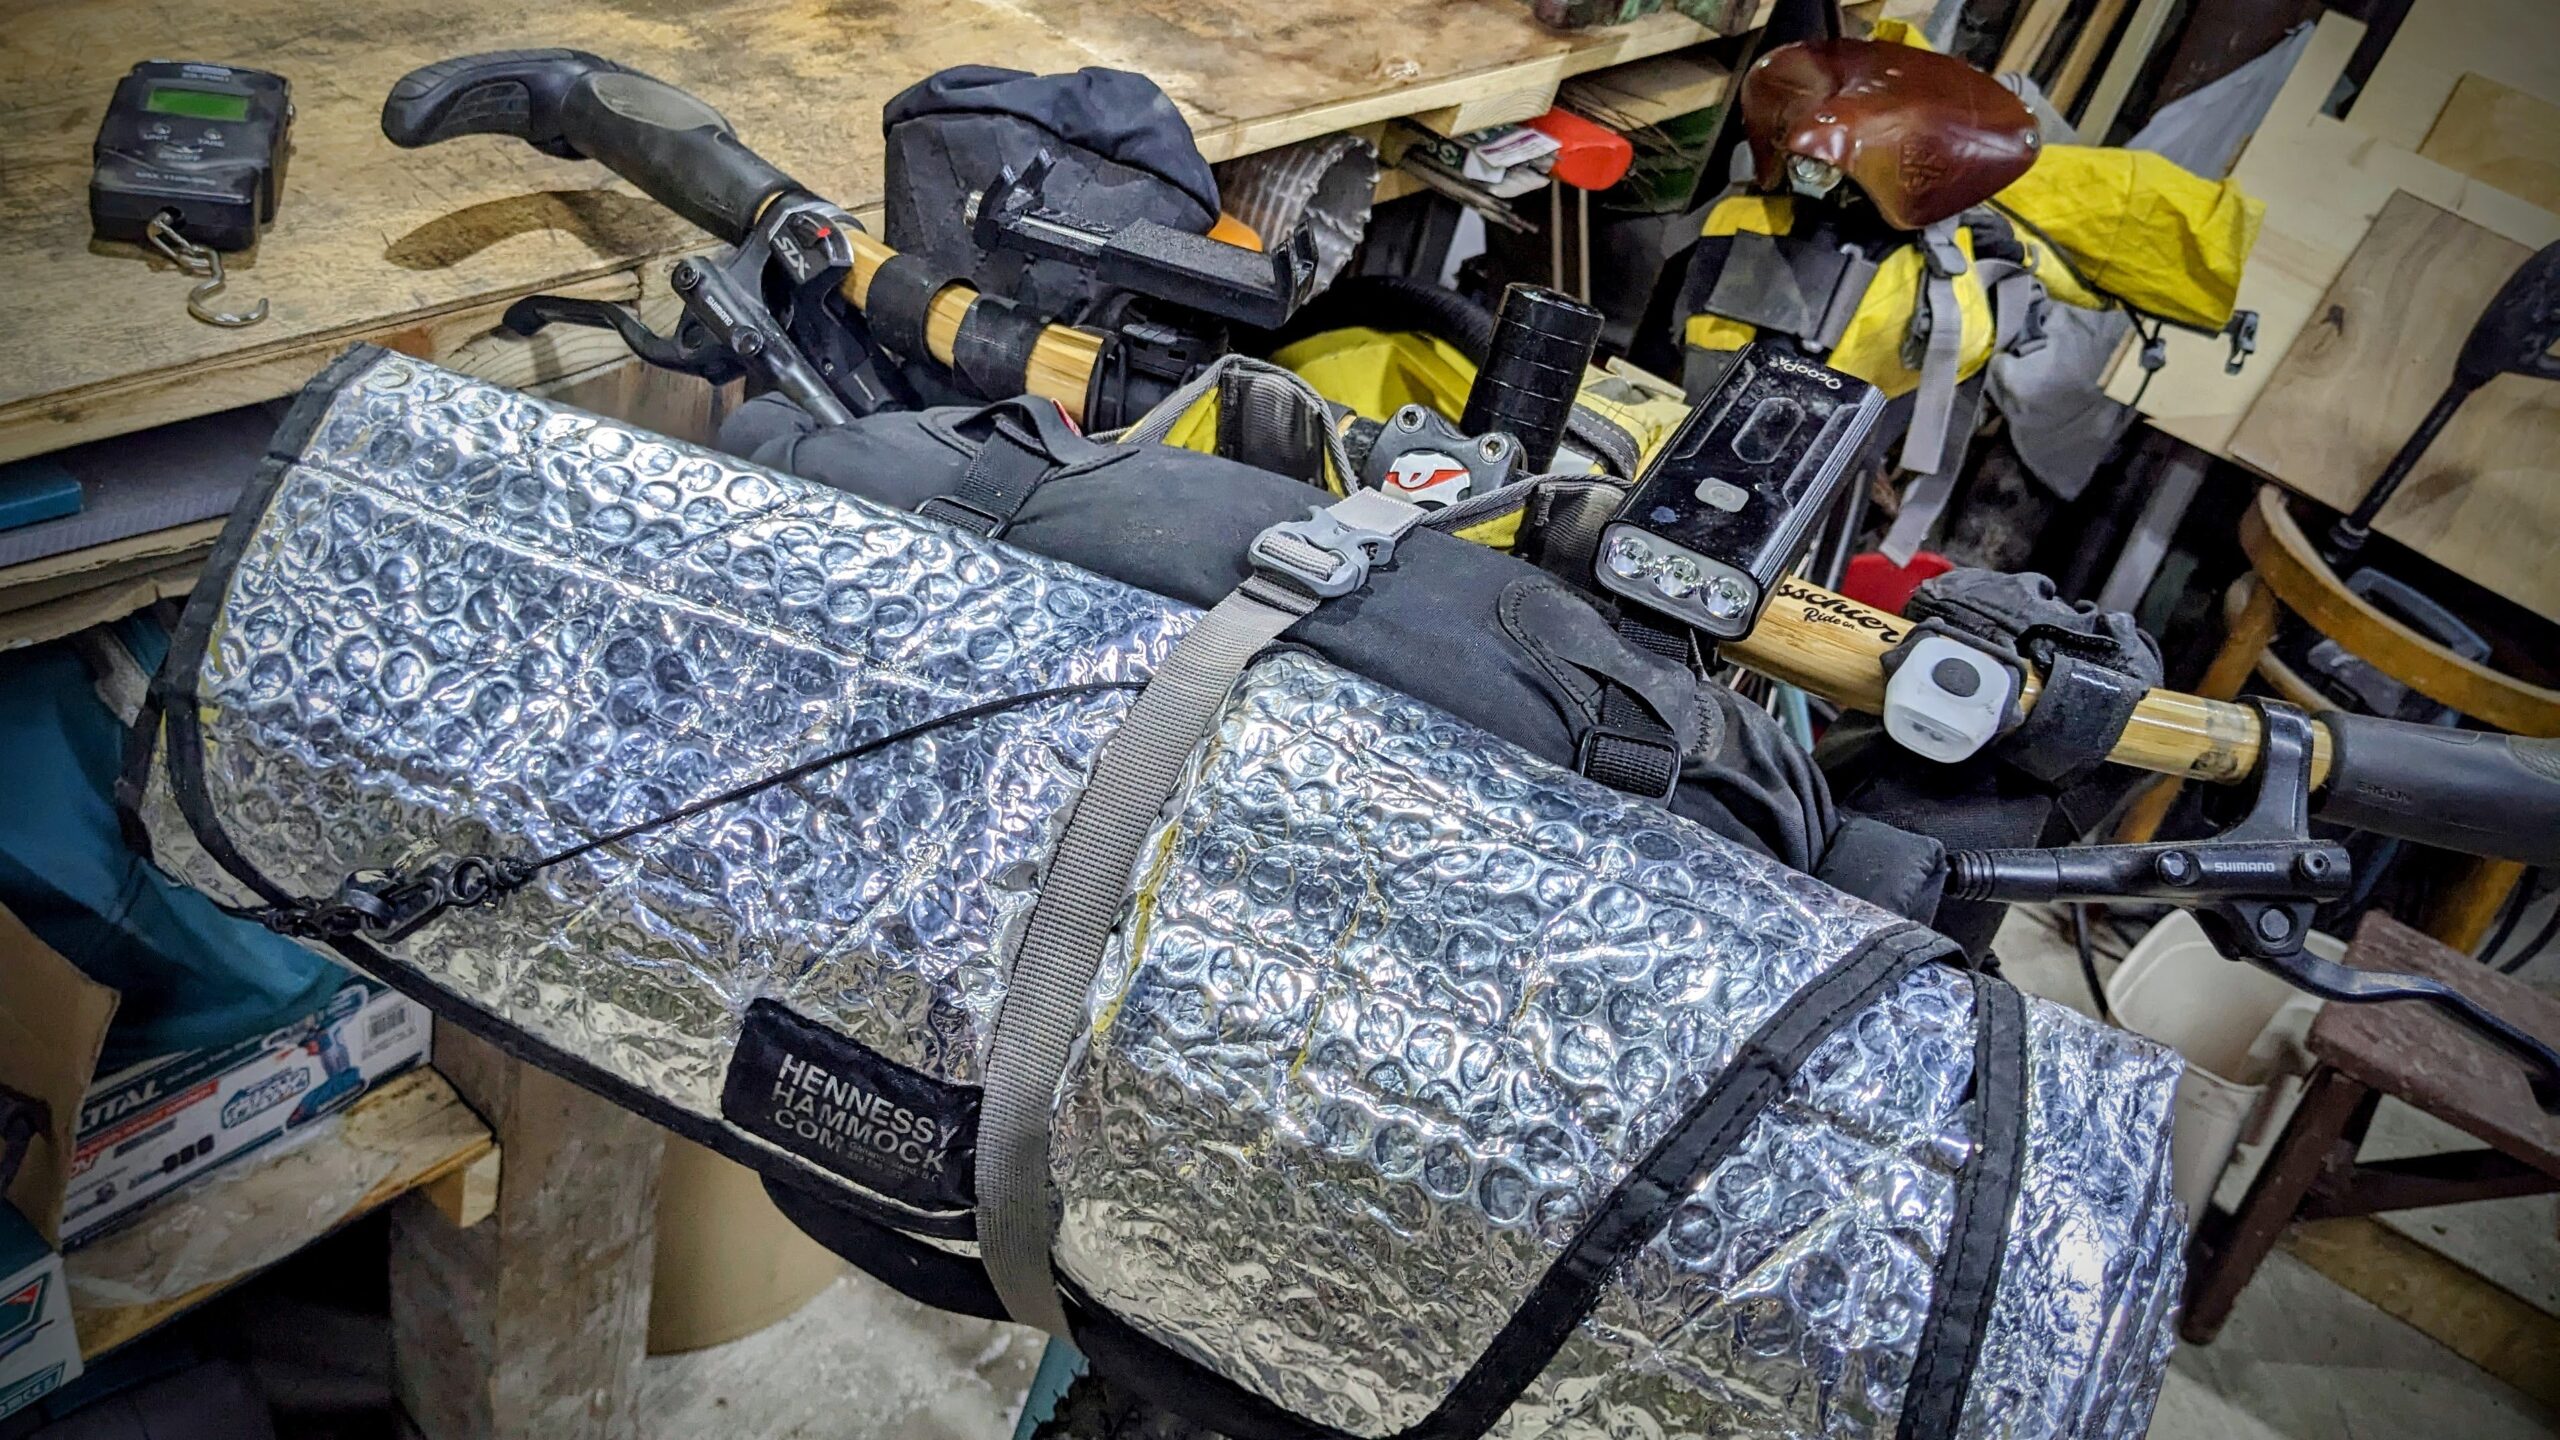 Tom's Bike Shed: Packing Ultralight Camping Gear For A Bikepacking